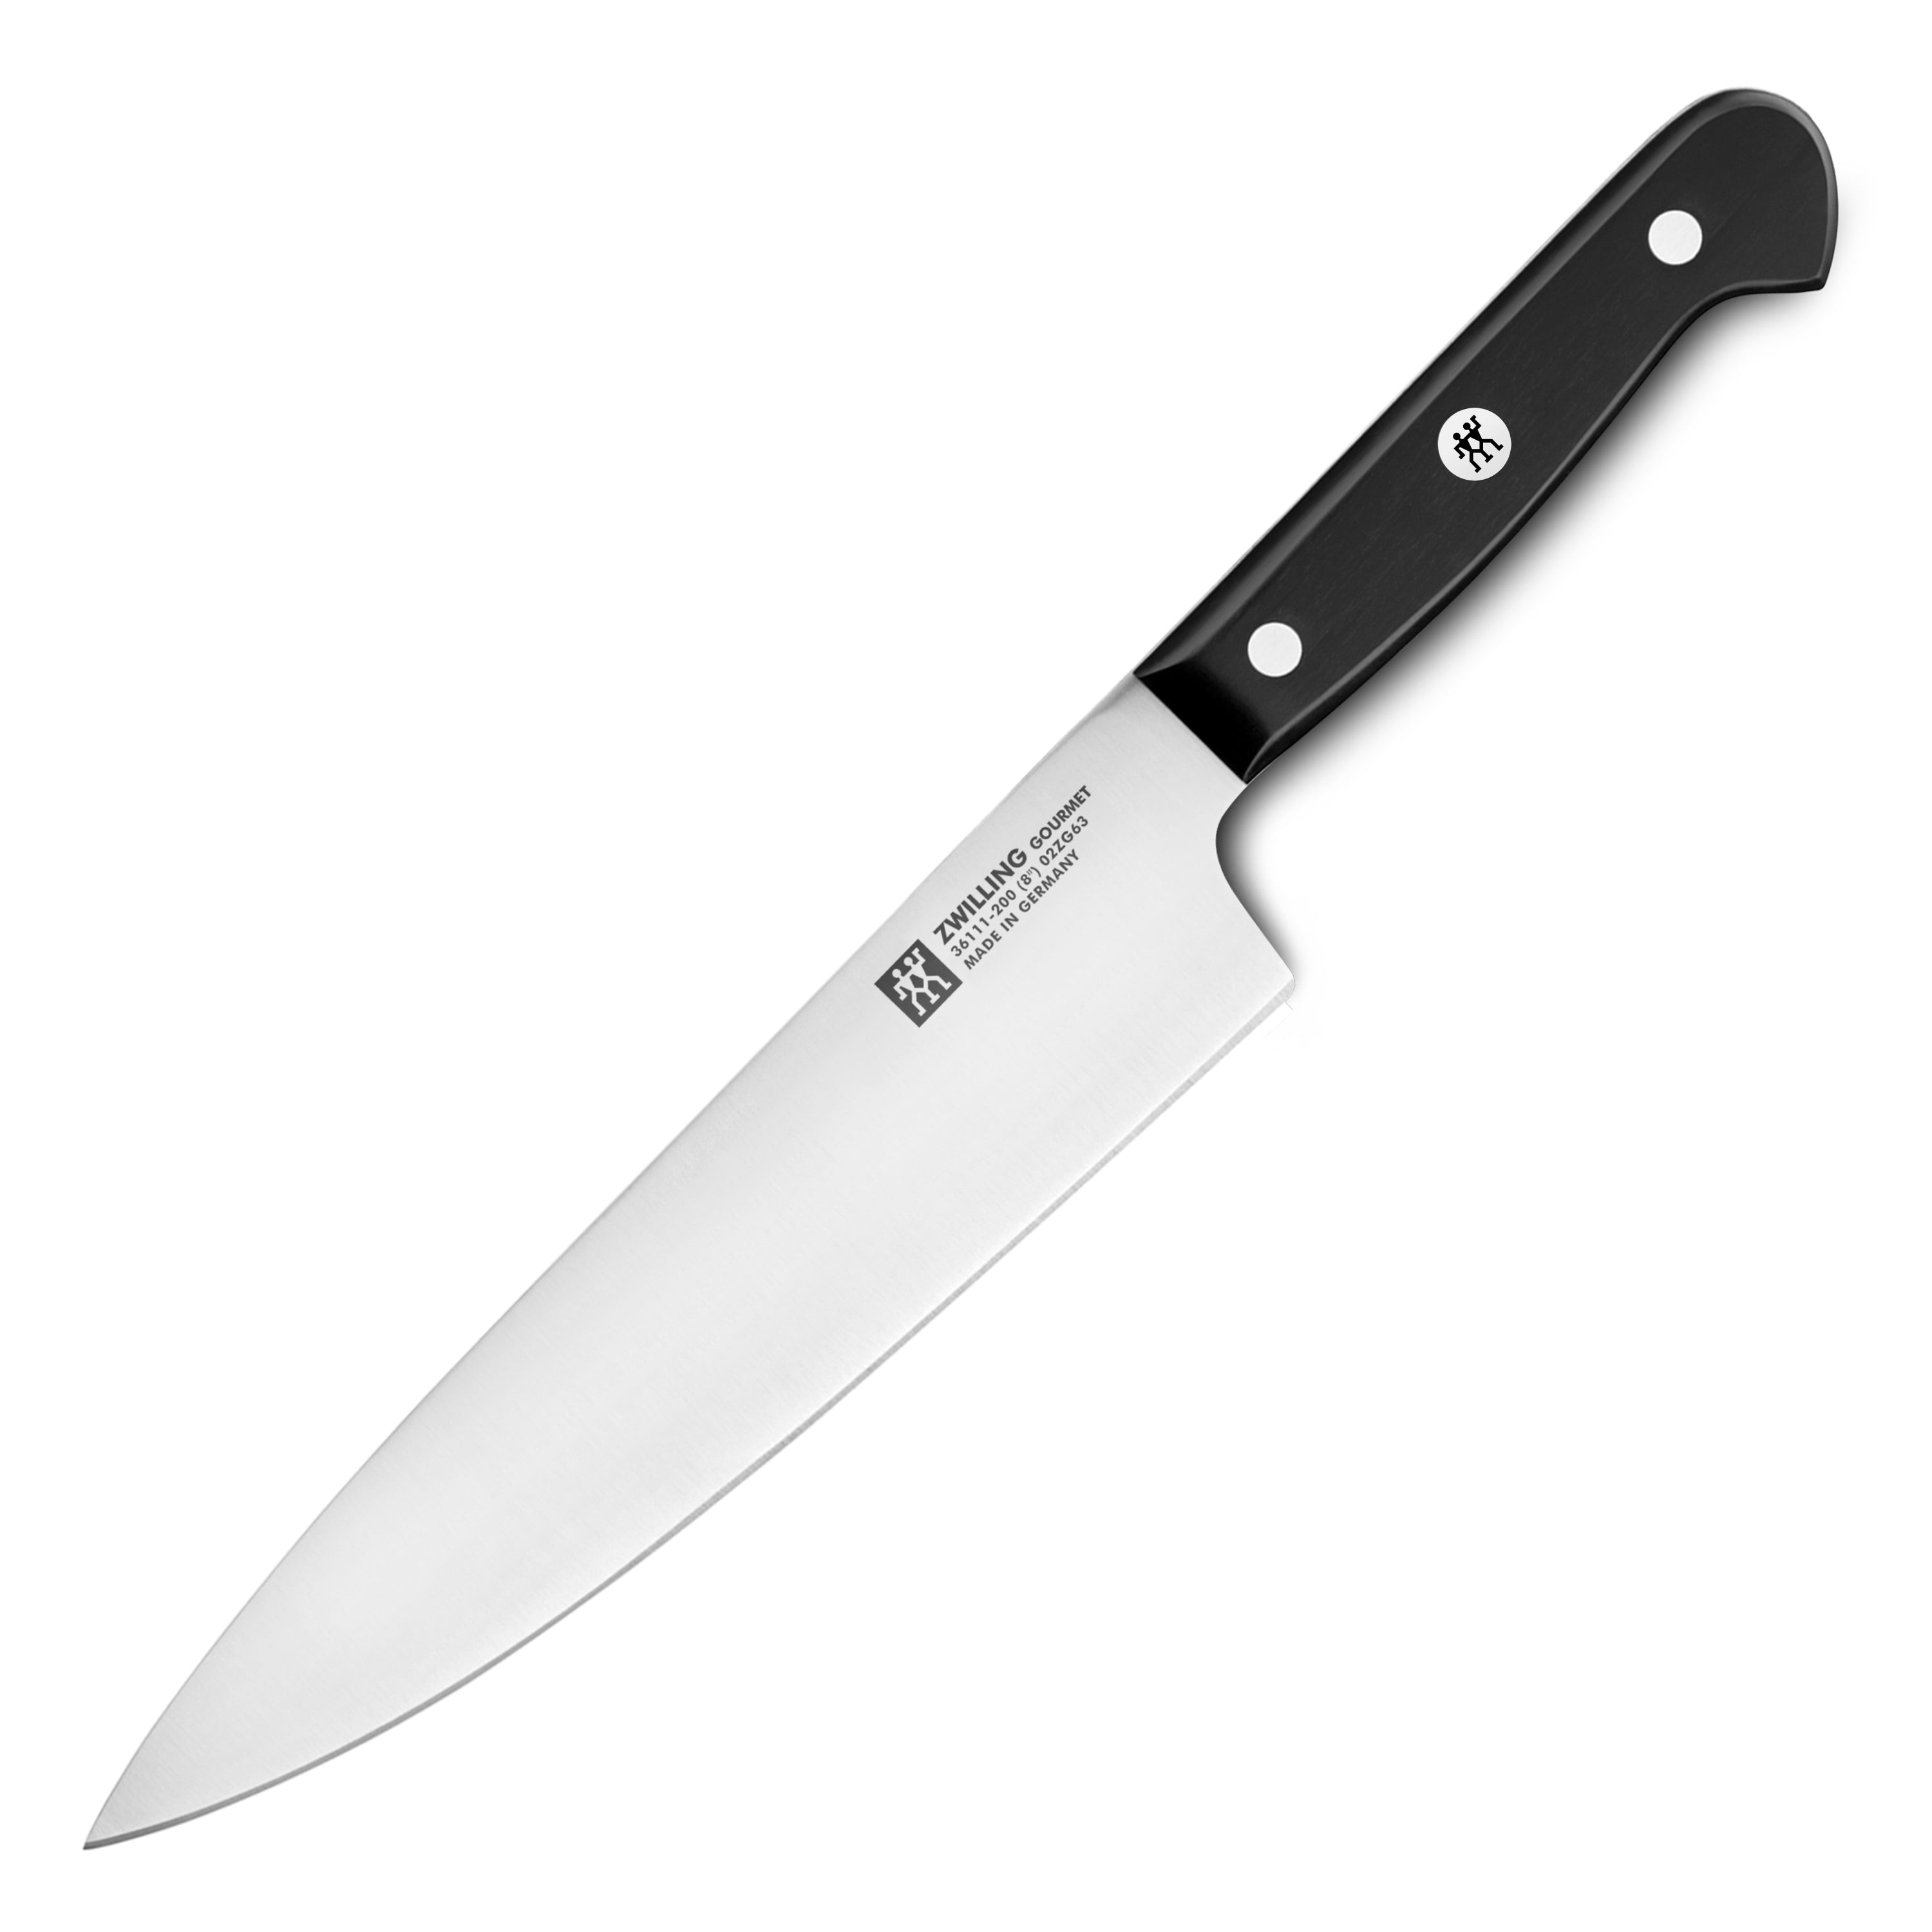 ZWILLING TWIN Signature 8-inch, Chef's knife